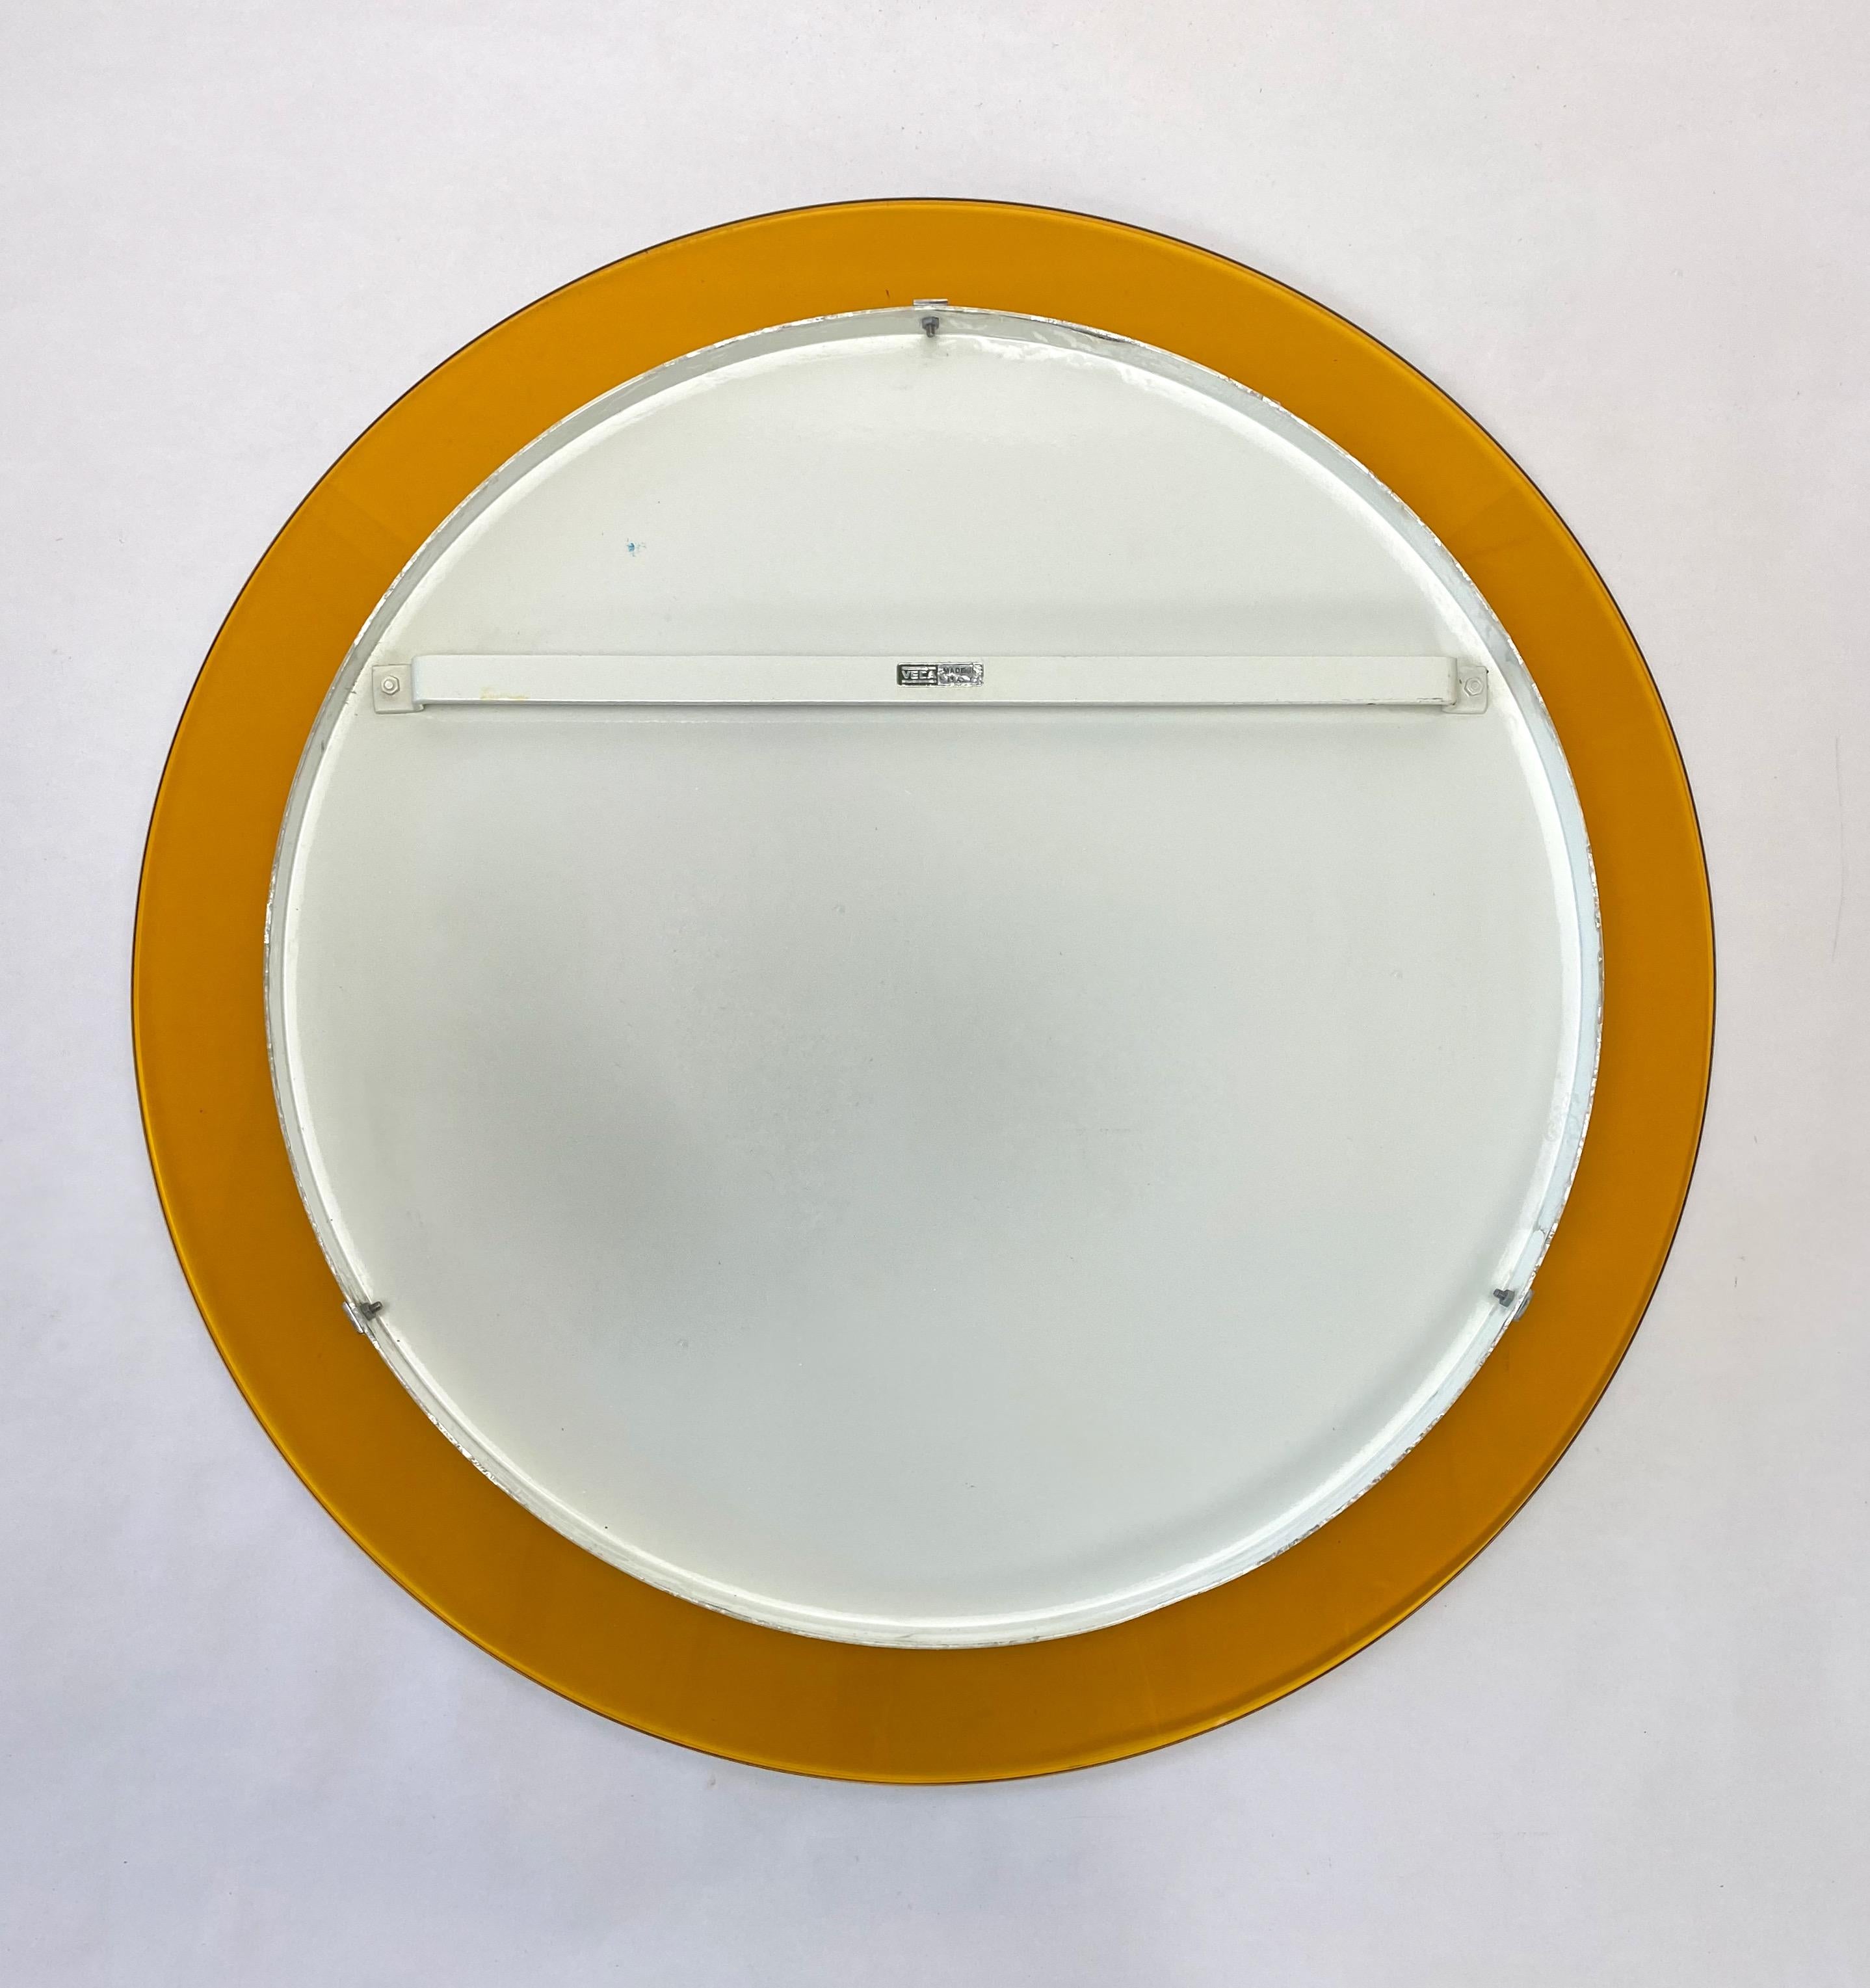 Mid-20th Century Round Yellow Convex Glass and Chrome Wall Mirror by Veca, Italy, 1960s For Sale